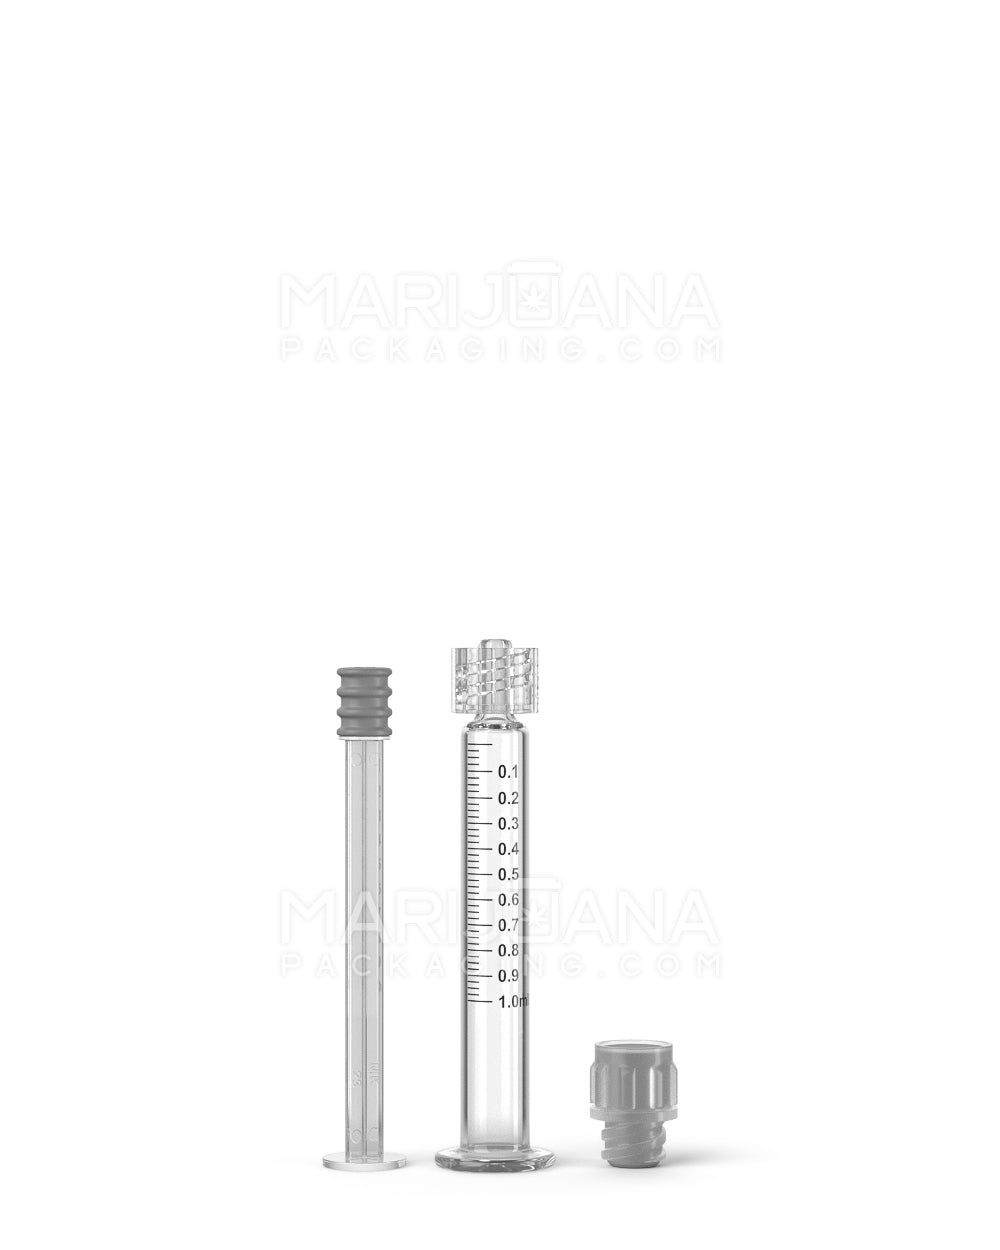 Luer Lock | Long Glass Dab Applicator Syringes | 1mL - 0.1mL Increments - 100 Count - 3